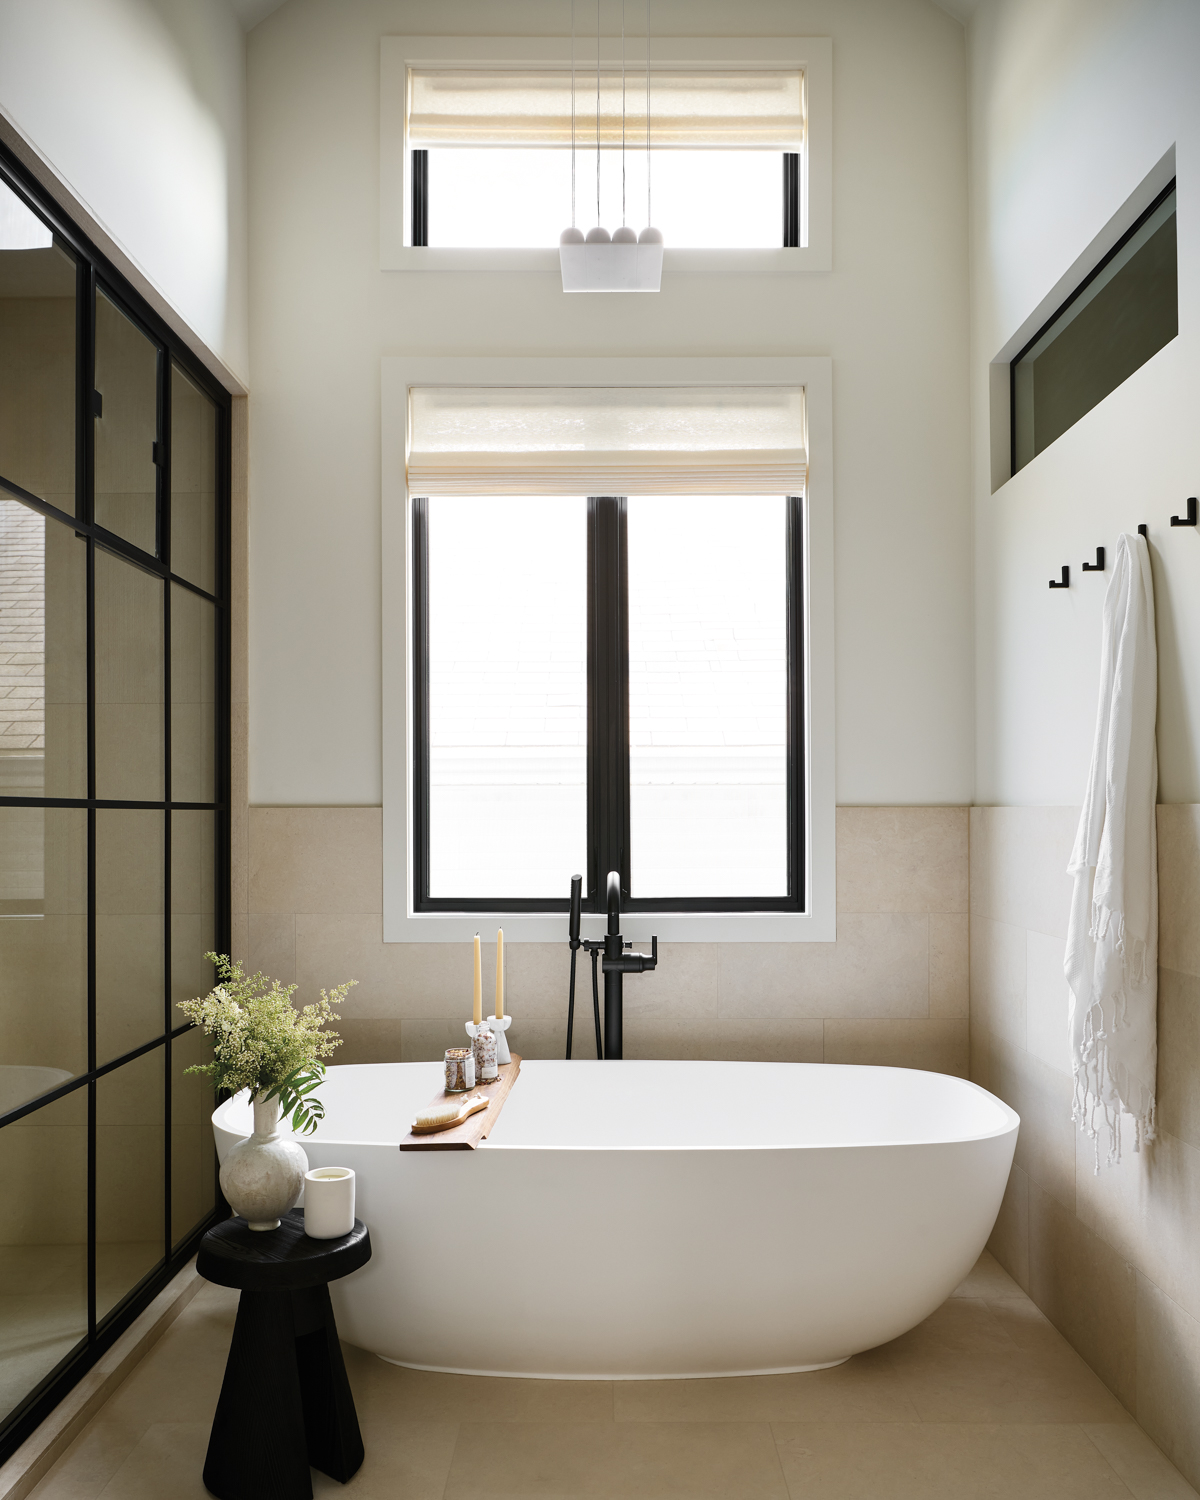 Freestanding tub sits in a...